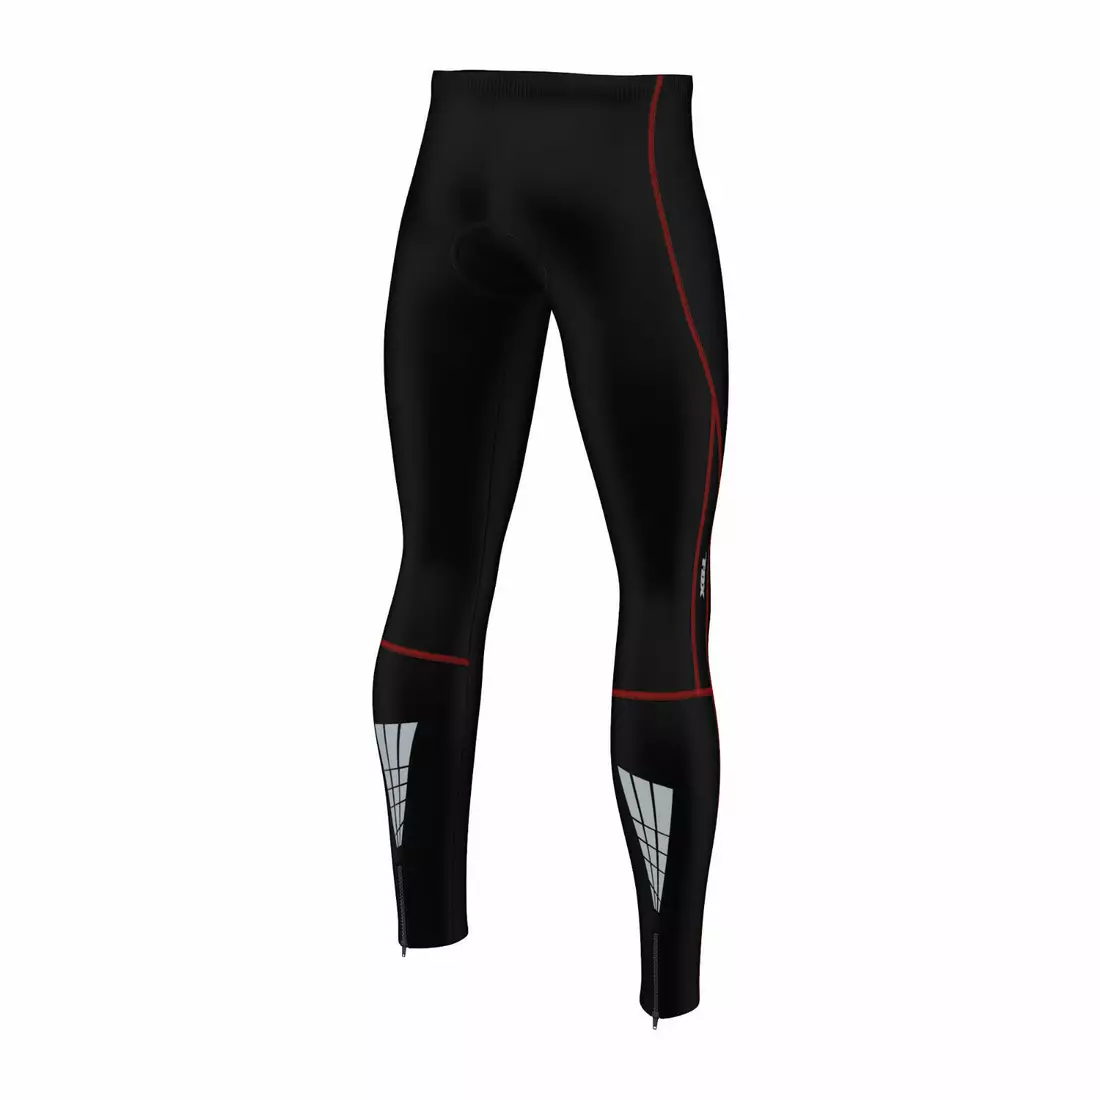 FDX 1830 cycling trousers, uninsulated. black-red stitching